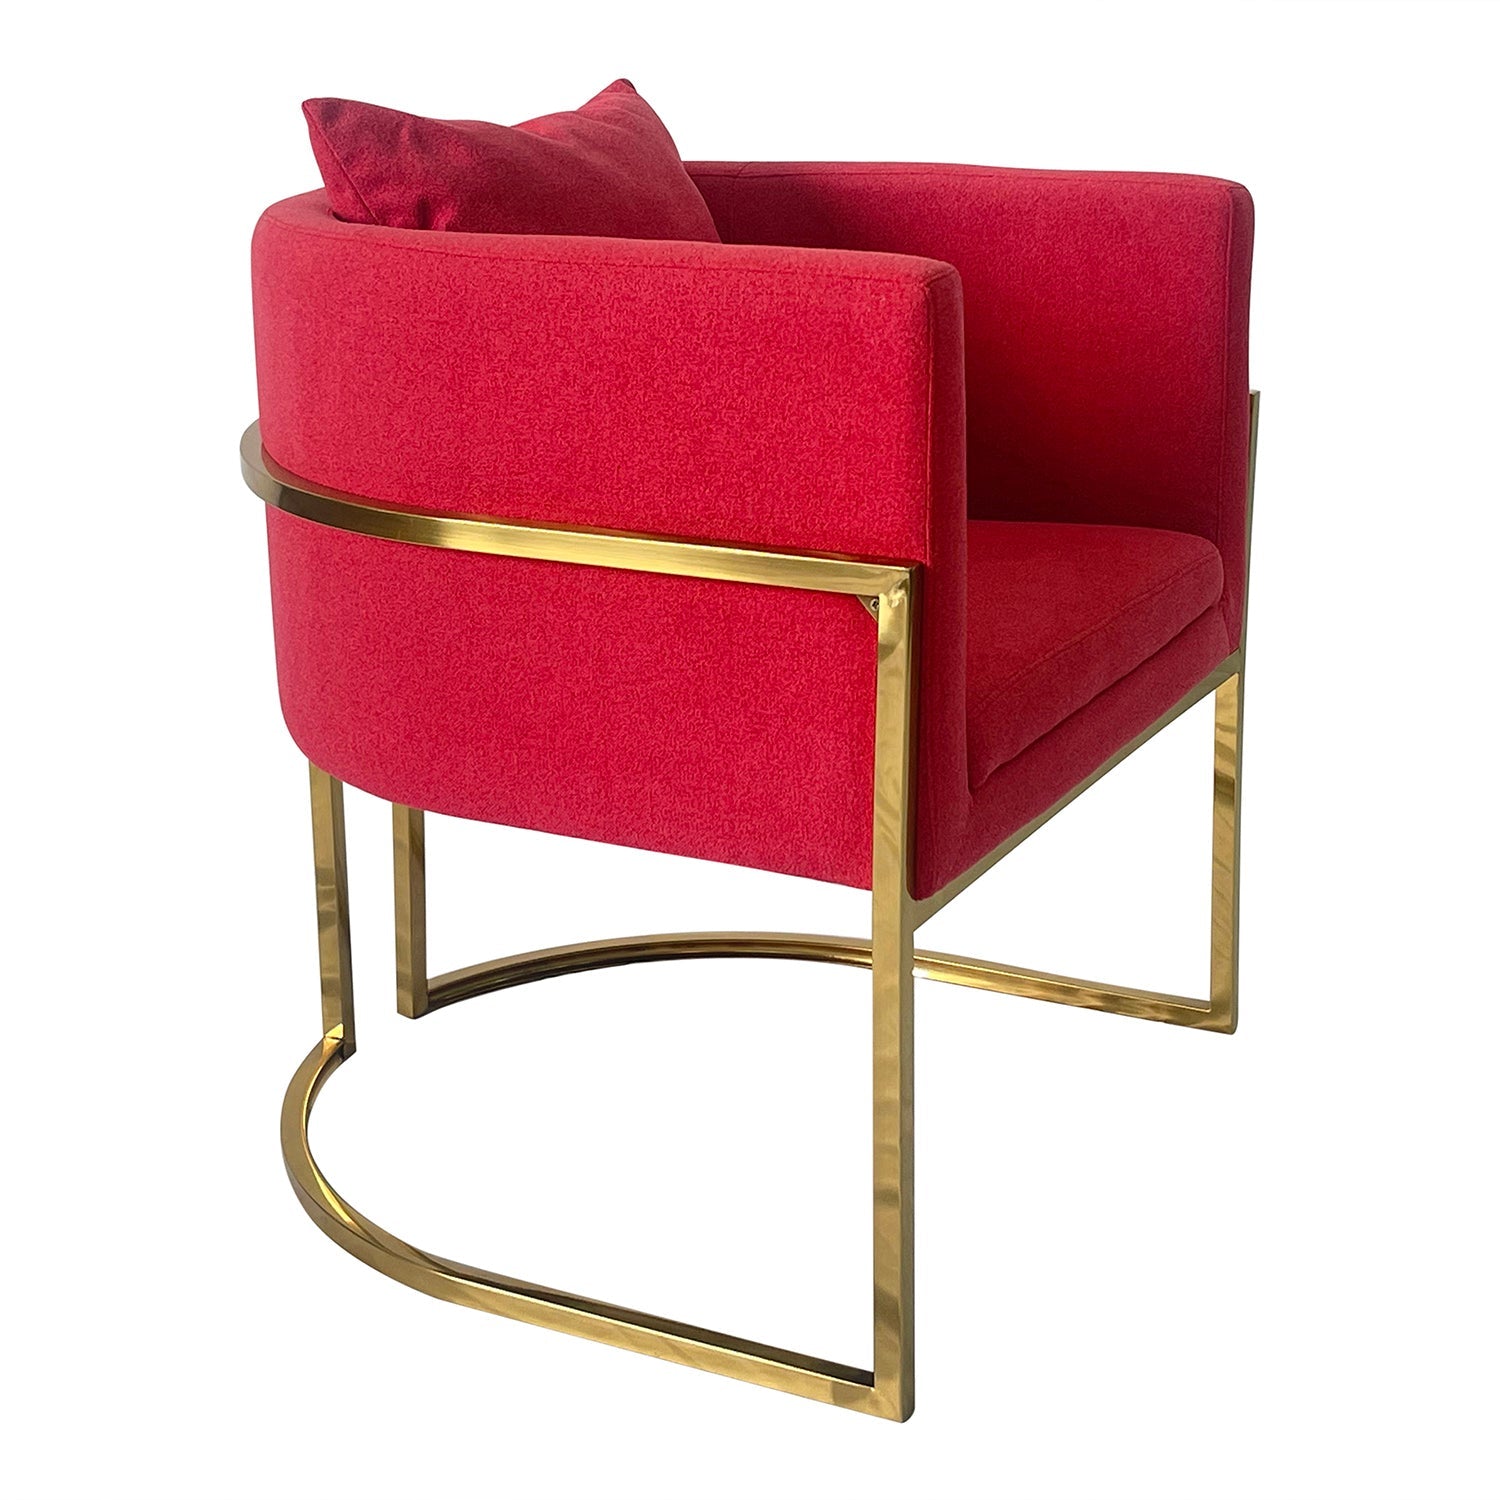 Red and Gold Sofa Chair